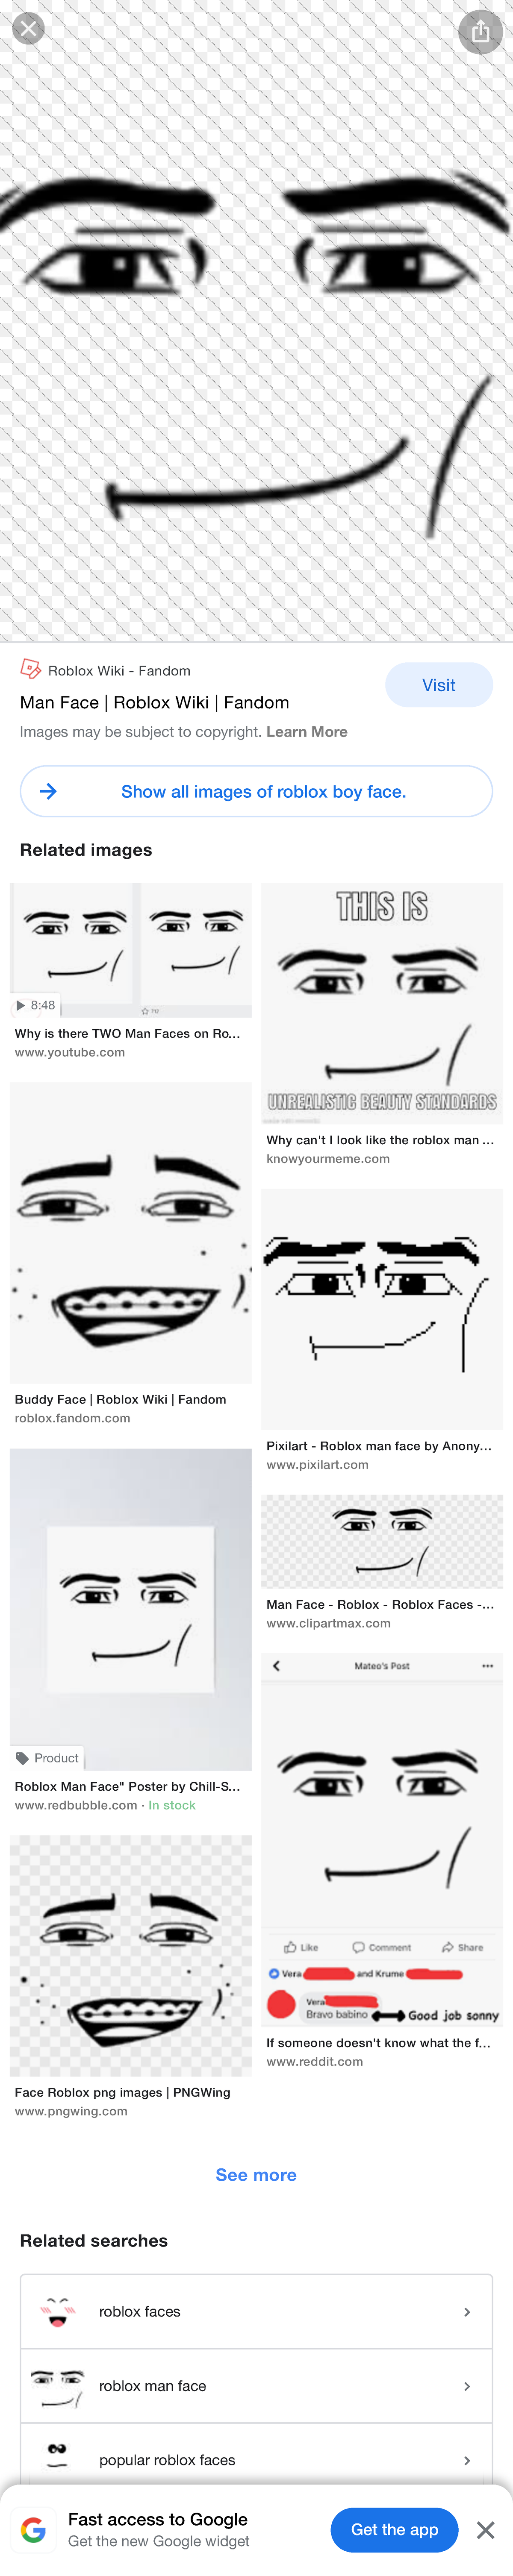 Roblox Man Face: Image Gallery (List View)